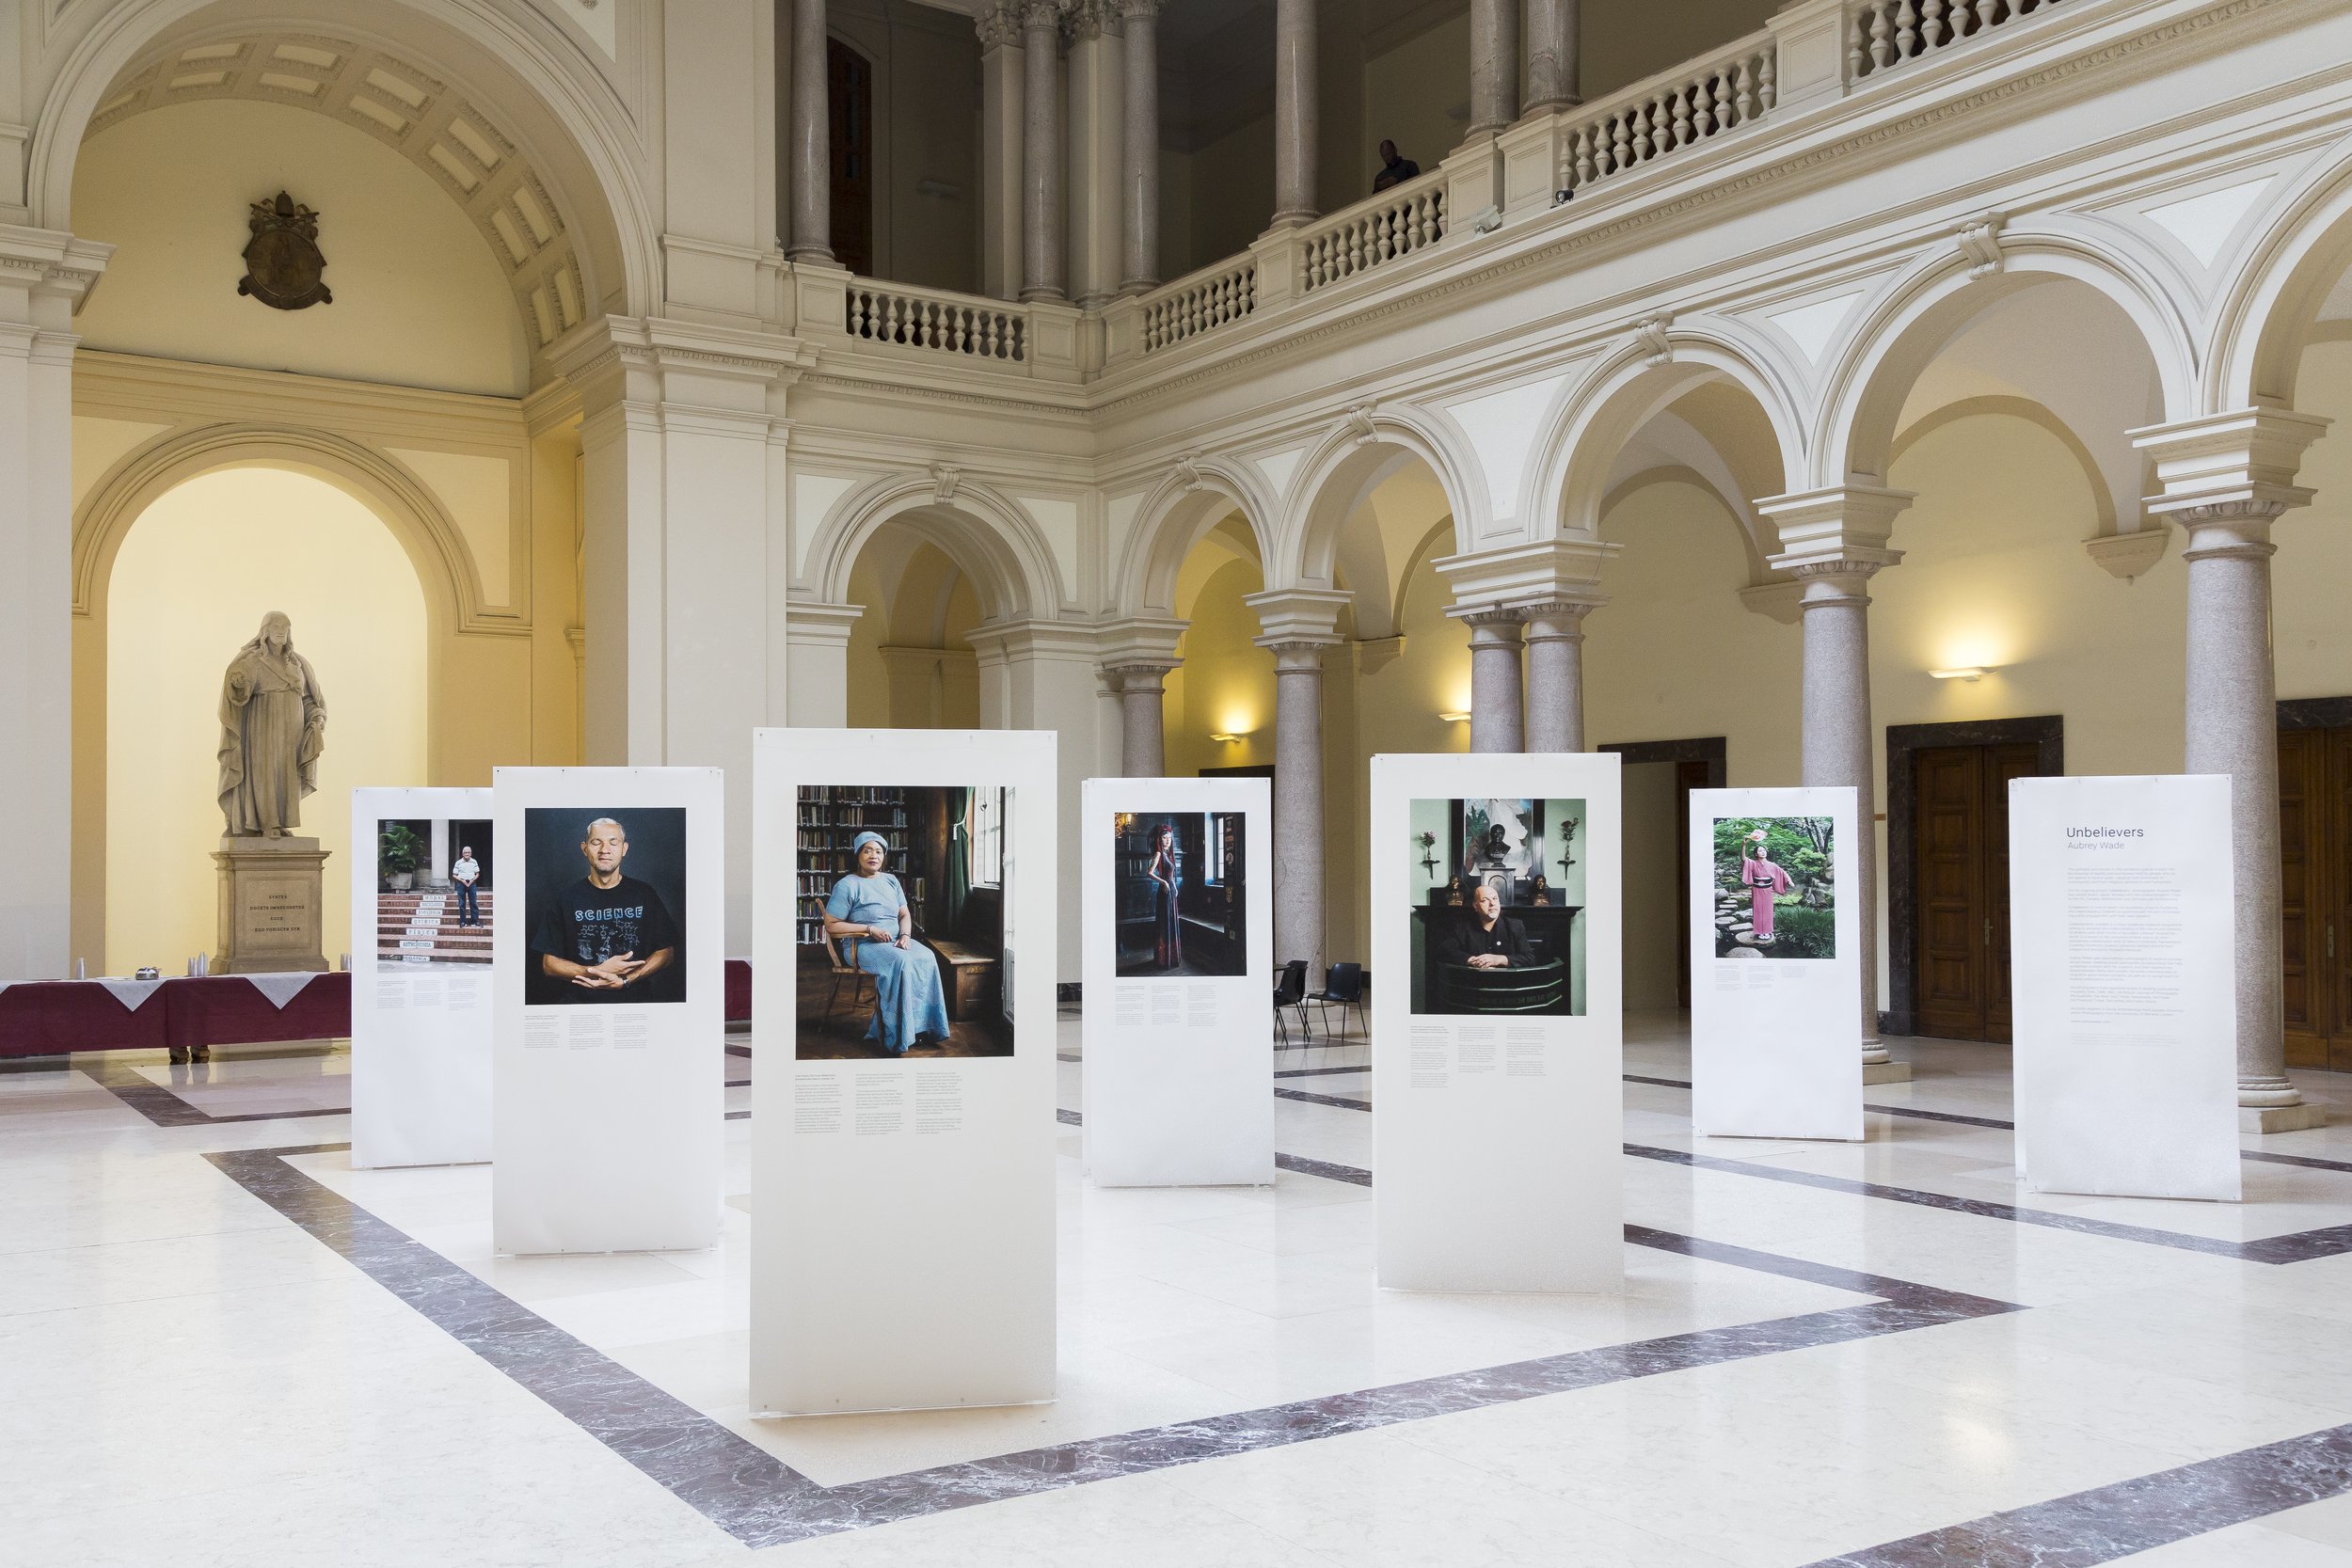  Exhibition of Aubrey Wade's 'Unbelievers' project at the Gregorian Pontifical University in Rome, Italy, during the Understanding Unbelief programme's capstone conference, 28 - 30 May 2019. The portraits and stories in the exhibition give an insight